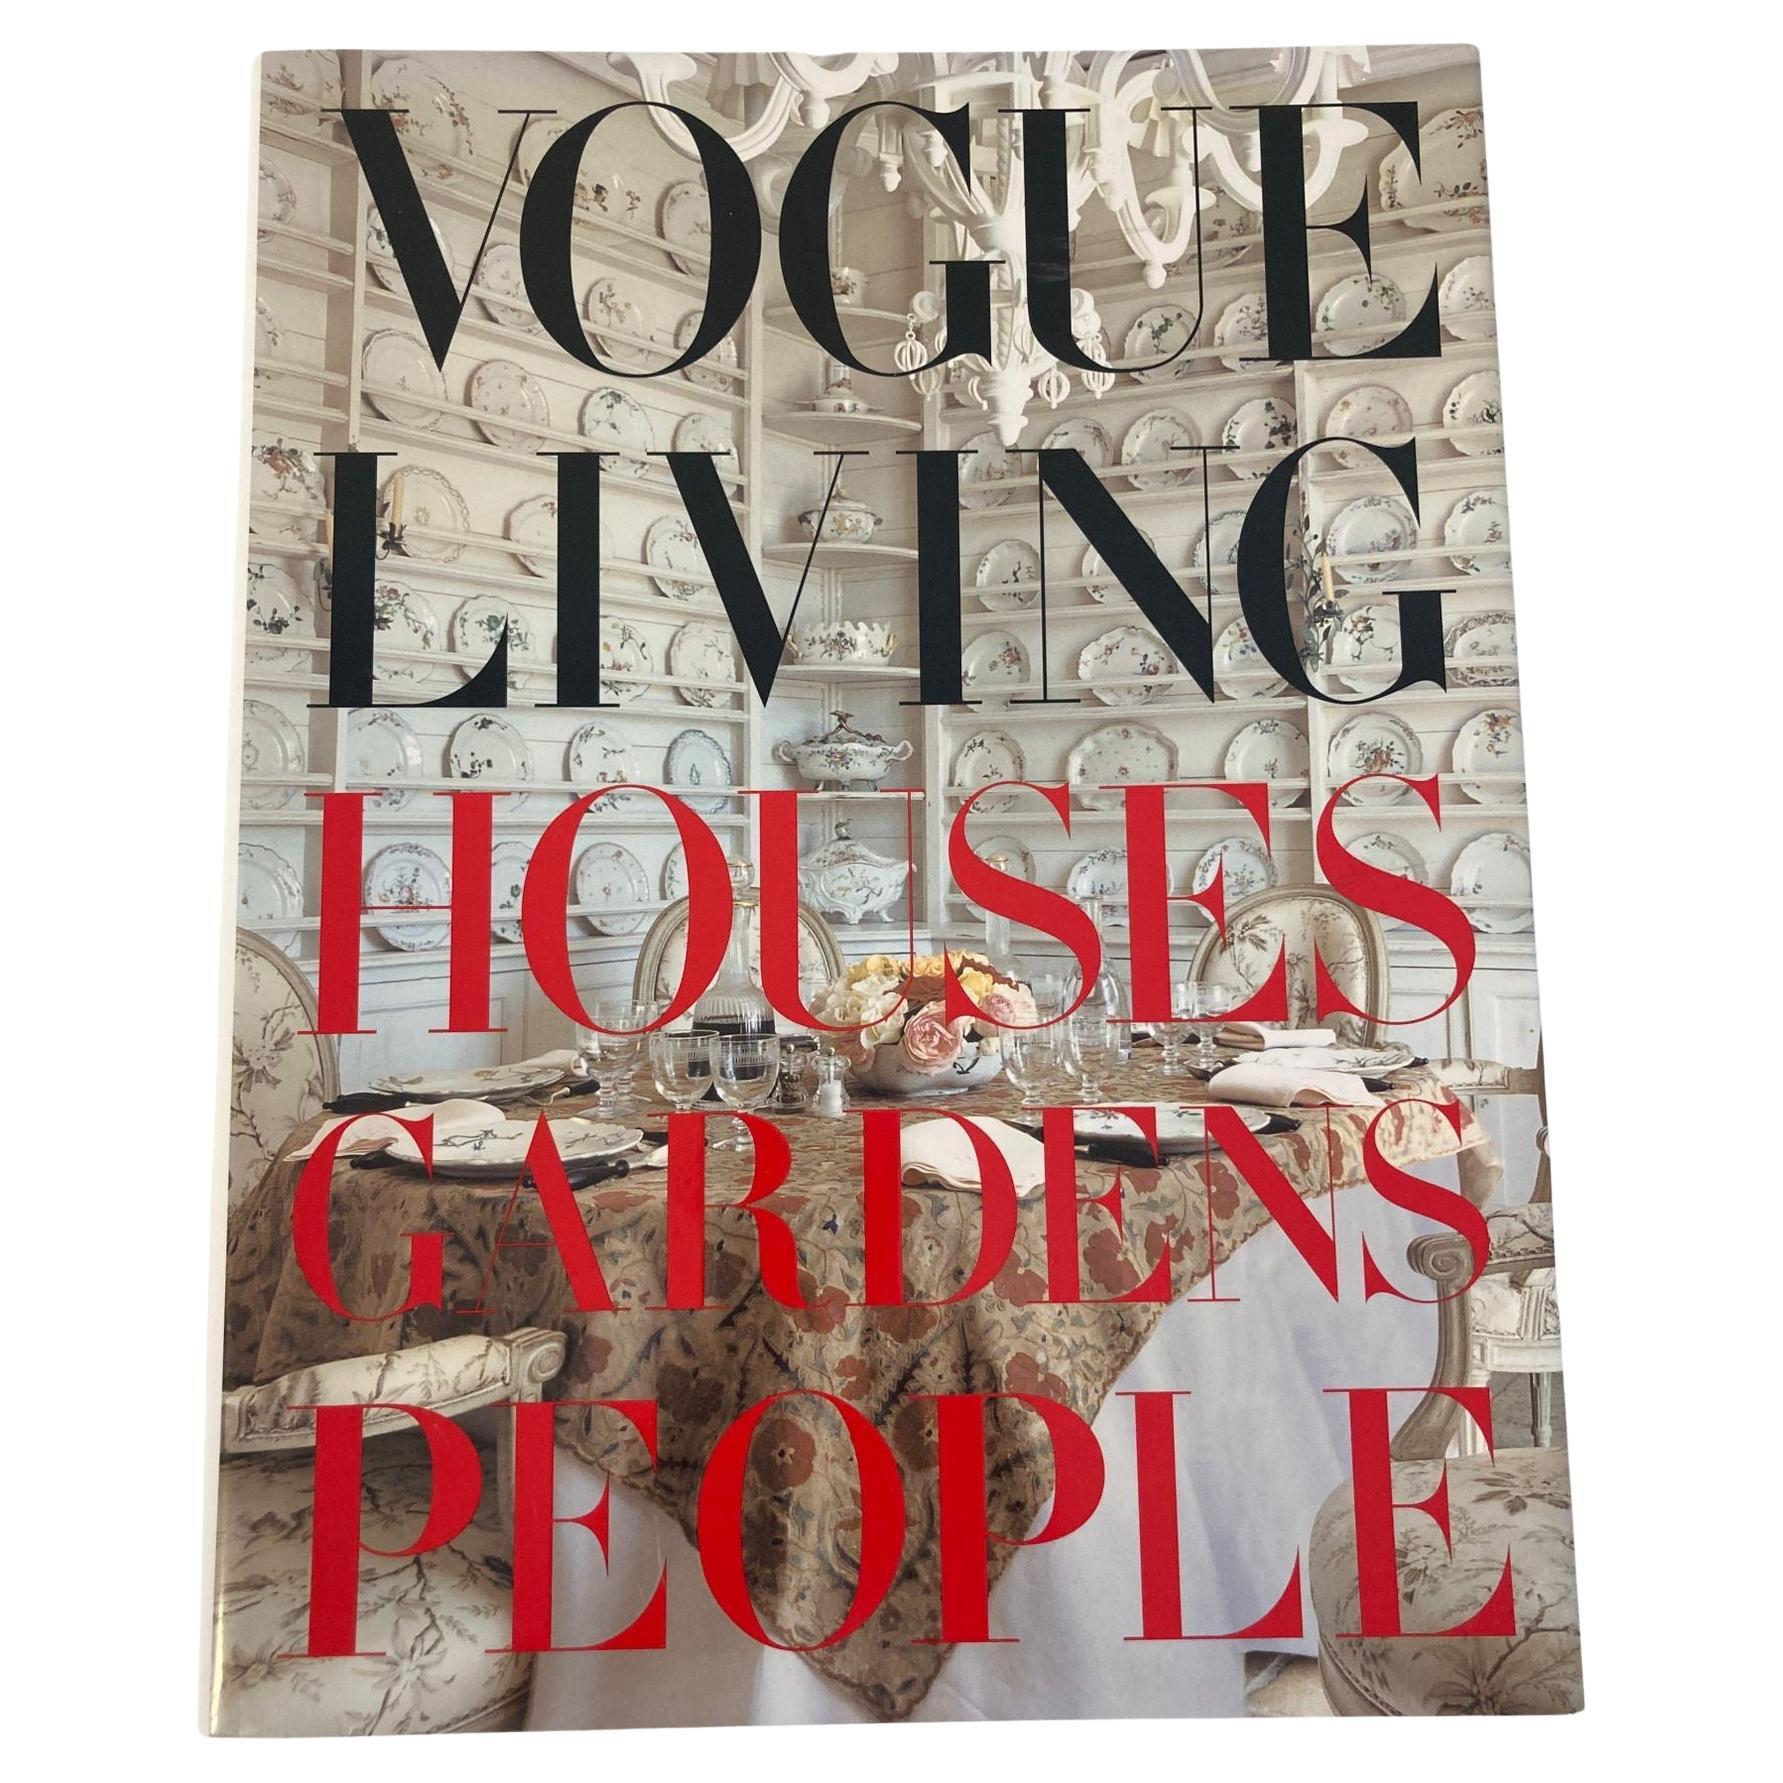 "Vogue Living Houses Gardens People" Book by Hamish Bowles, First Edition